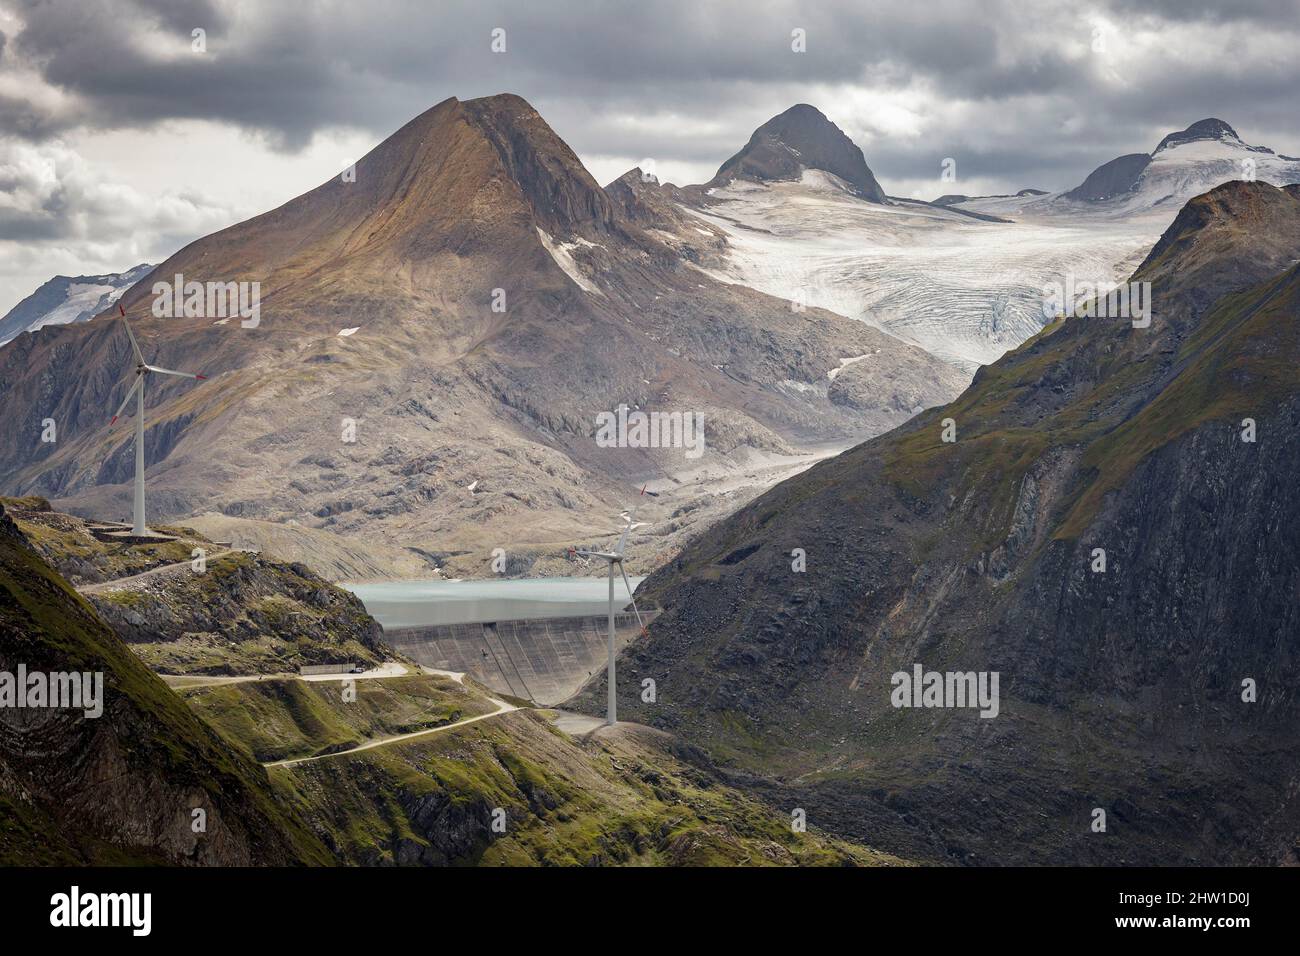 Switzerland, canton of Ticino, Ulrichen, Nufenen pass, Gries dam, two wind turbines in their mountain environment, site of the highest wind farm in Europe, 2500 meters above sea level, view of Arbola Peak (Ofenhorn, 3235m), in the background, located on the Italy-Switzerland border Stock Photo